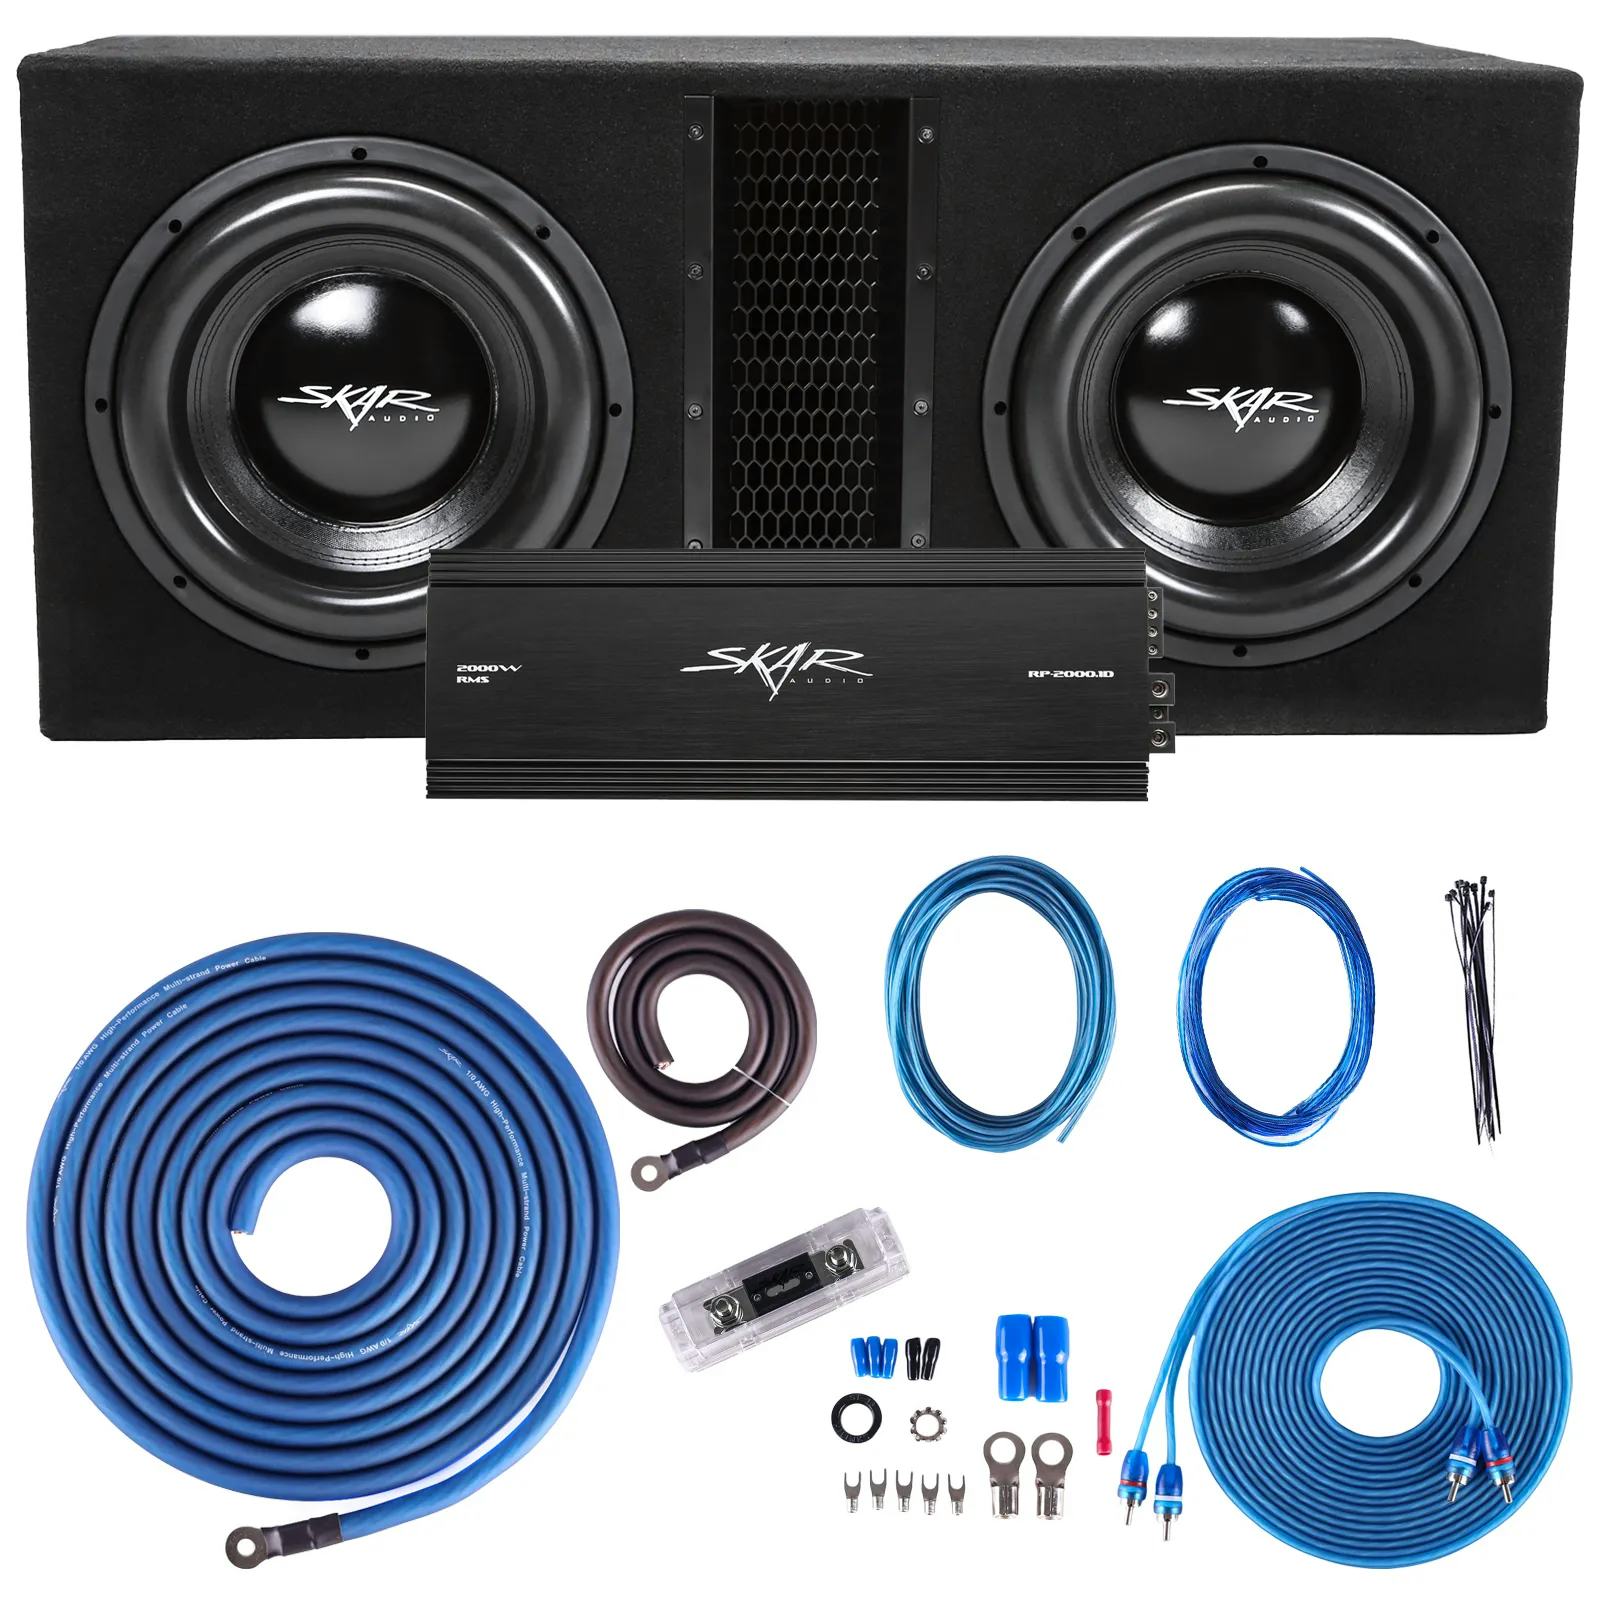 Dual 12" 5,000 Watt EVL Series Complete Subwoofer Package with Vented Enclosure and Amplifier #1